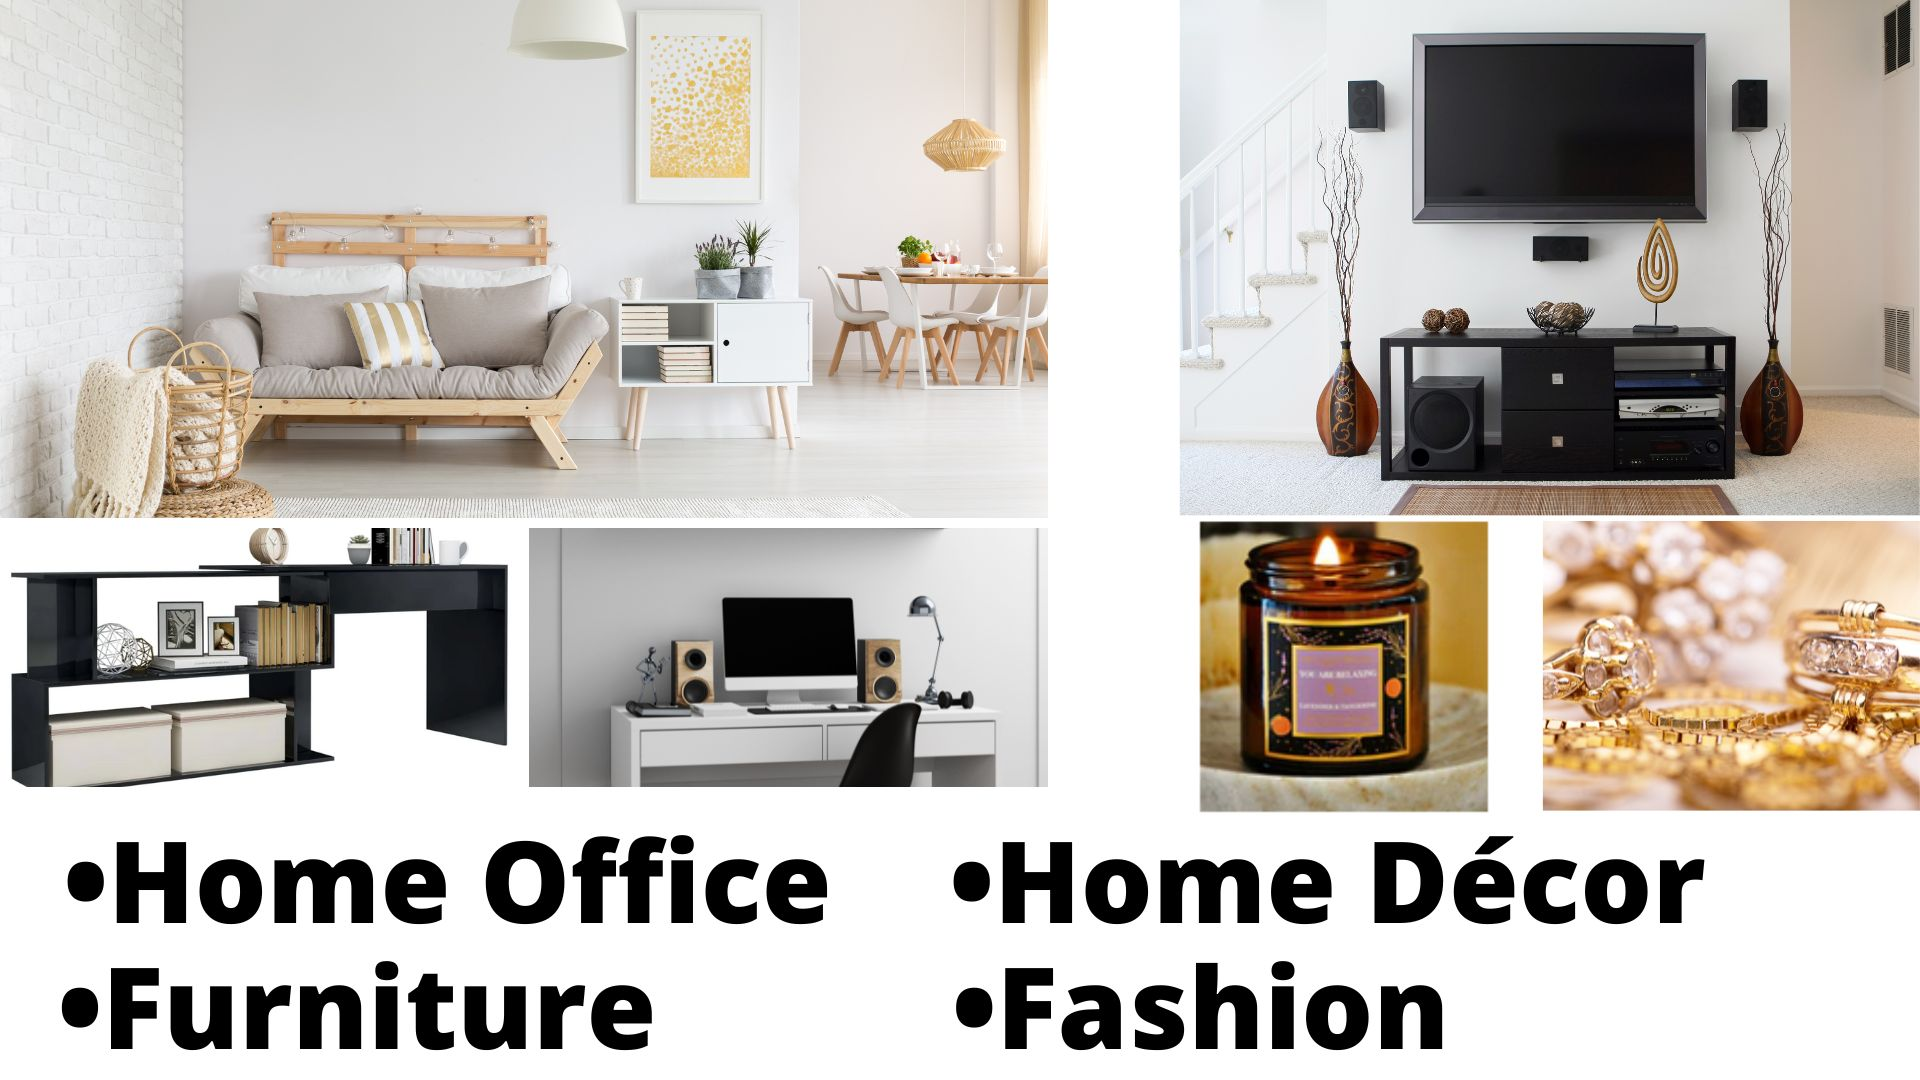 Home Office, Furniture, Home Decor, Fashion, Working from Home, Candles, Scented, Laptop Station, work desk, WFH, local business, home office setup, startup